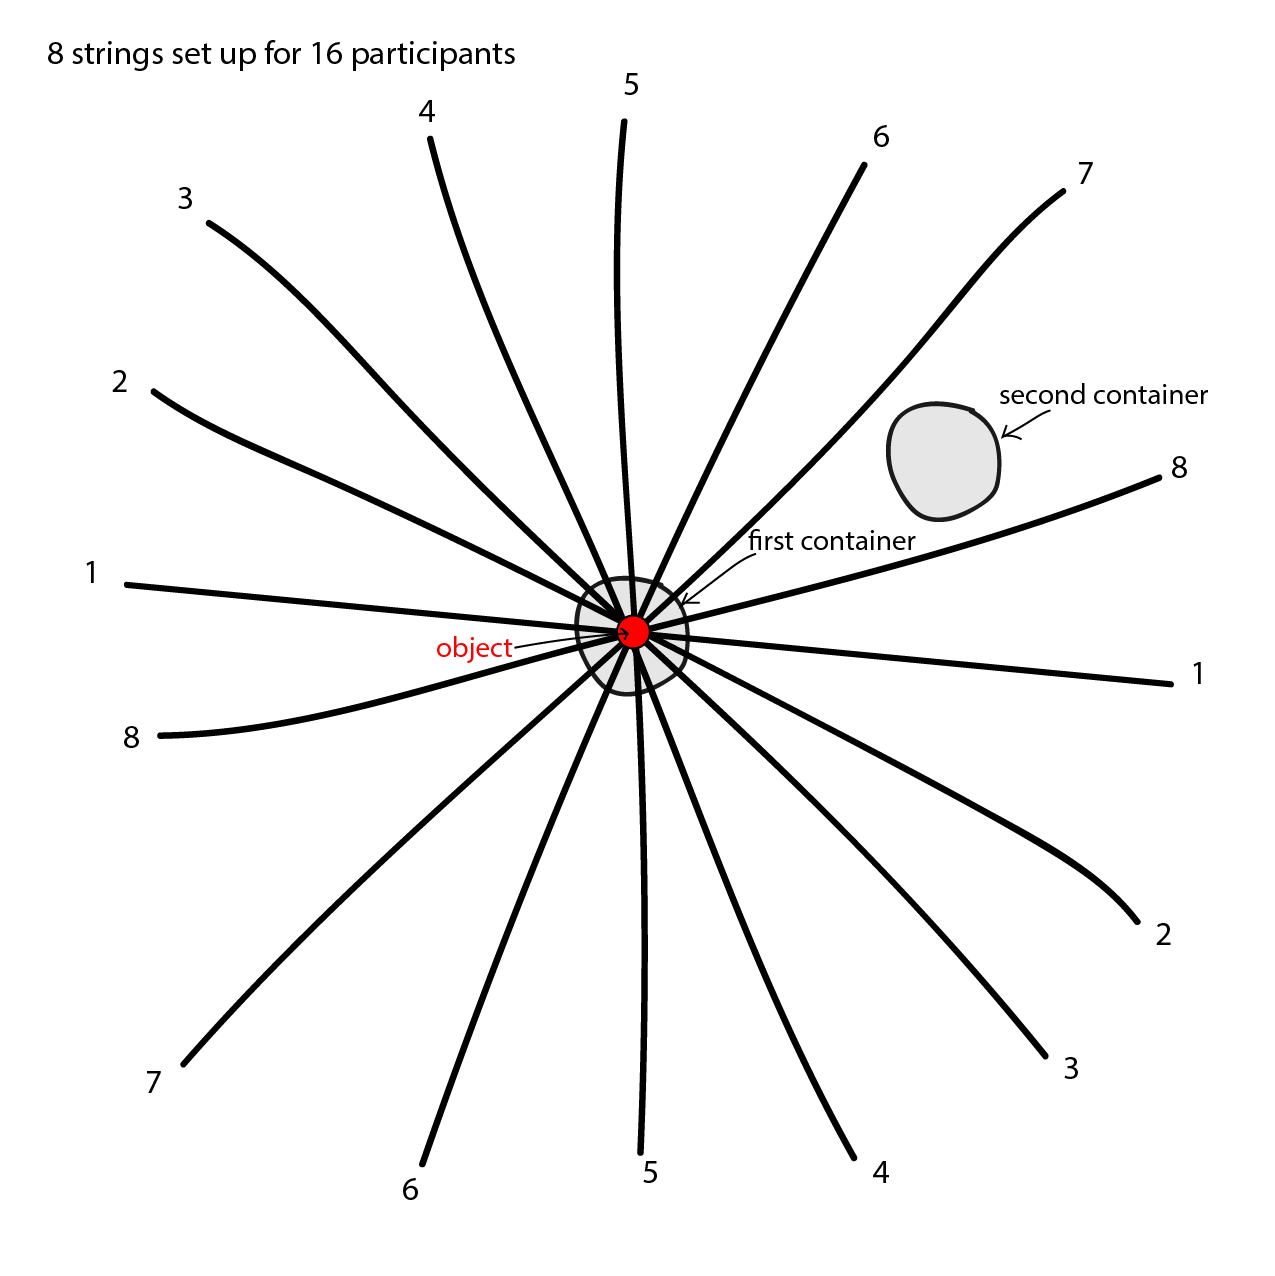 A diagram showing 8
evenly-spaced straight lines that all intersect at their mid-point, creating a kind of giant asterisk or starburst. The
lines are labeled with numbers 1 through 8. Underlying the intersection point there is a circle labeled “first
container” and a short distance away there is a second circle labeled “second container”. Lying on top of the
intersection point is a smaller circle labeled “object”. Text reads “8 strings set up for 16 participants”